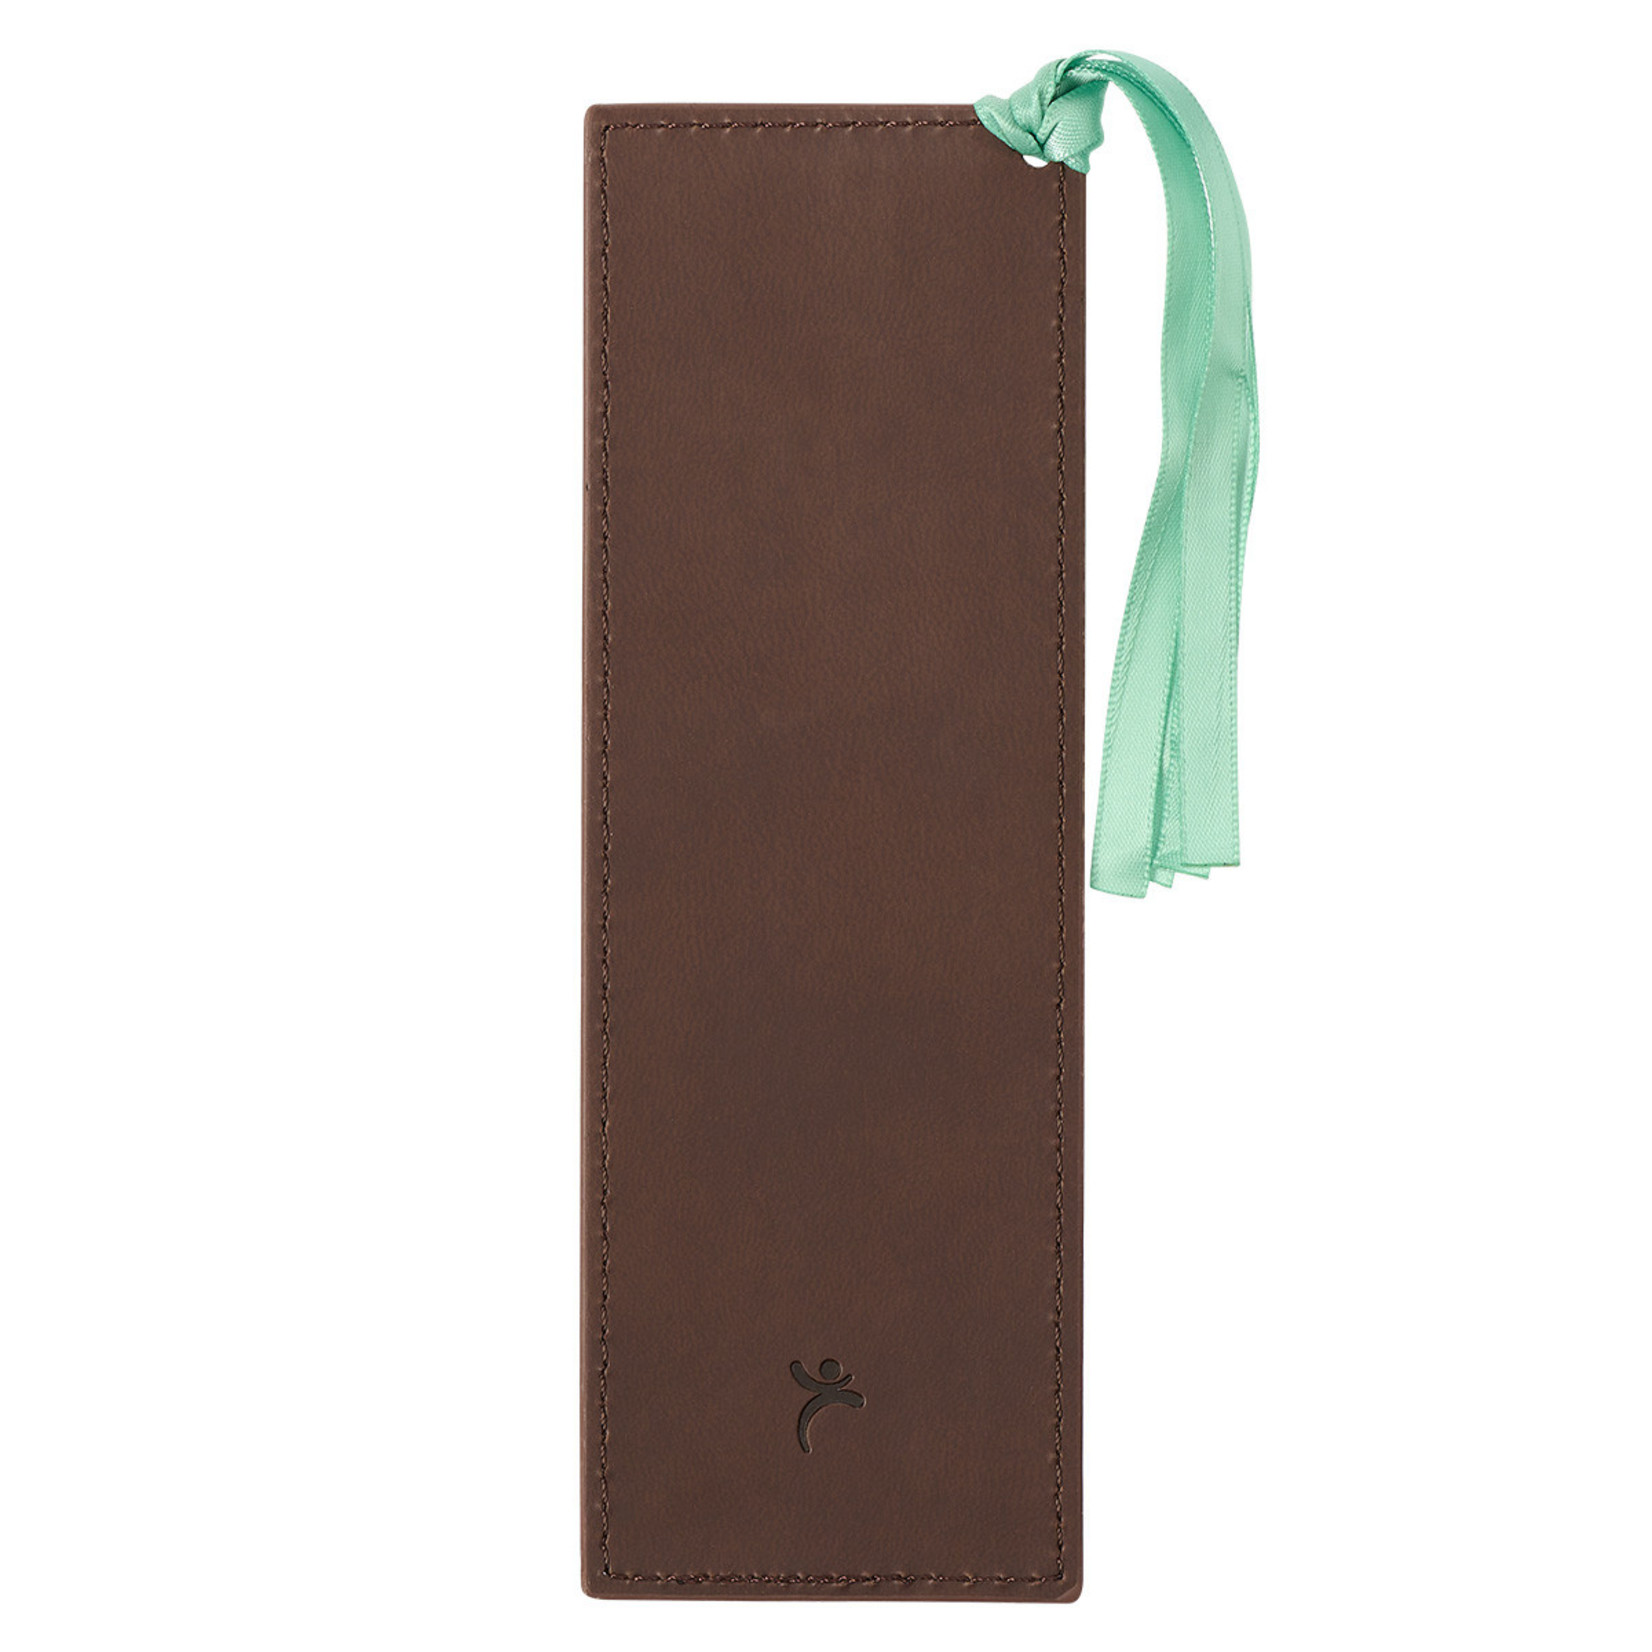 Christian Art Gifts Trust With All Your Heart Brown Floral Faux Leather Bookmark - Proverbs 3:5